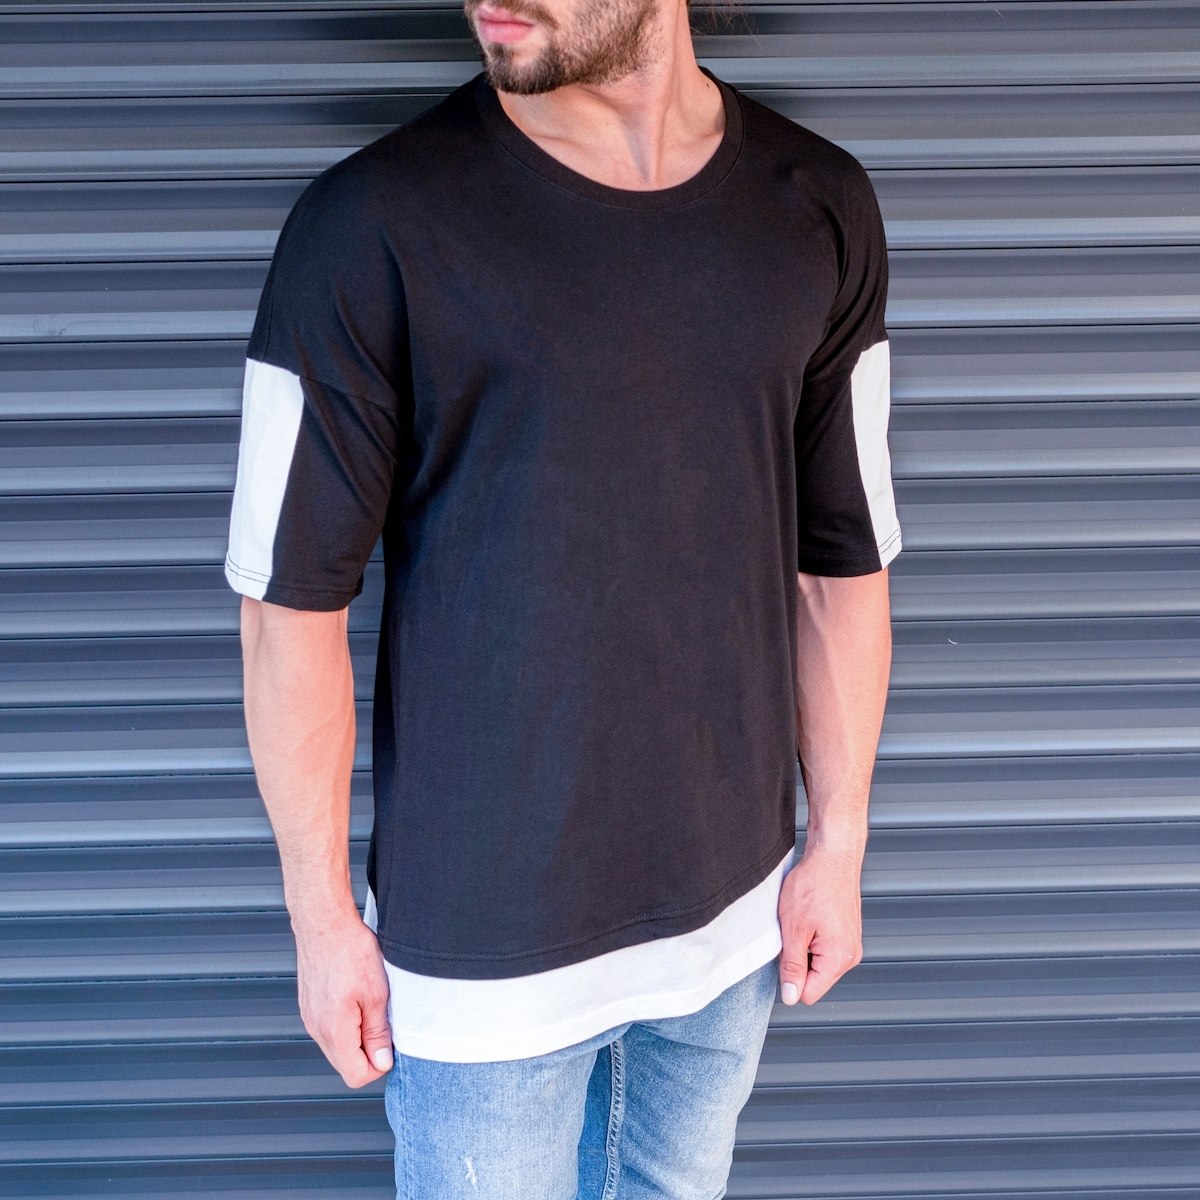 Men's Oversized T-Shirt With Stripes - 2